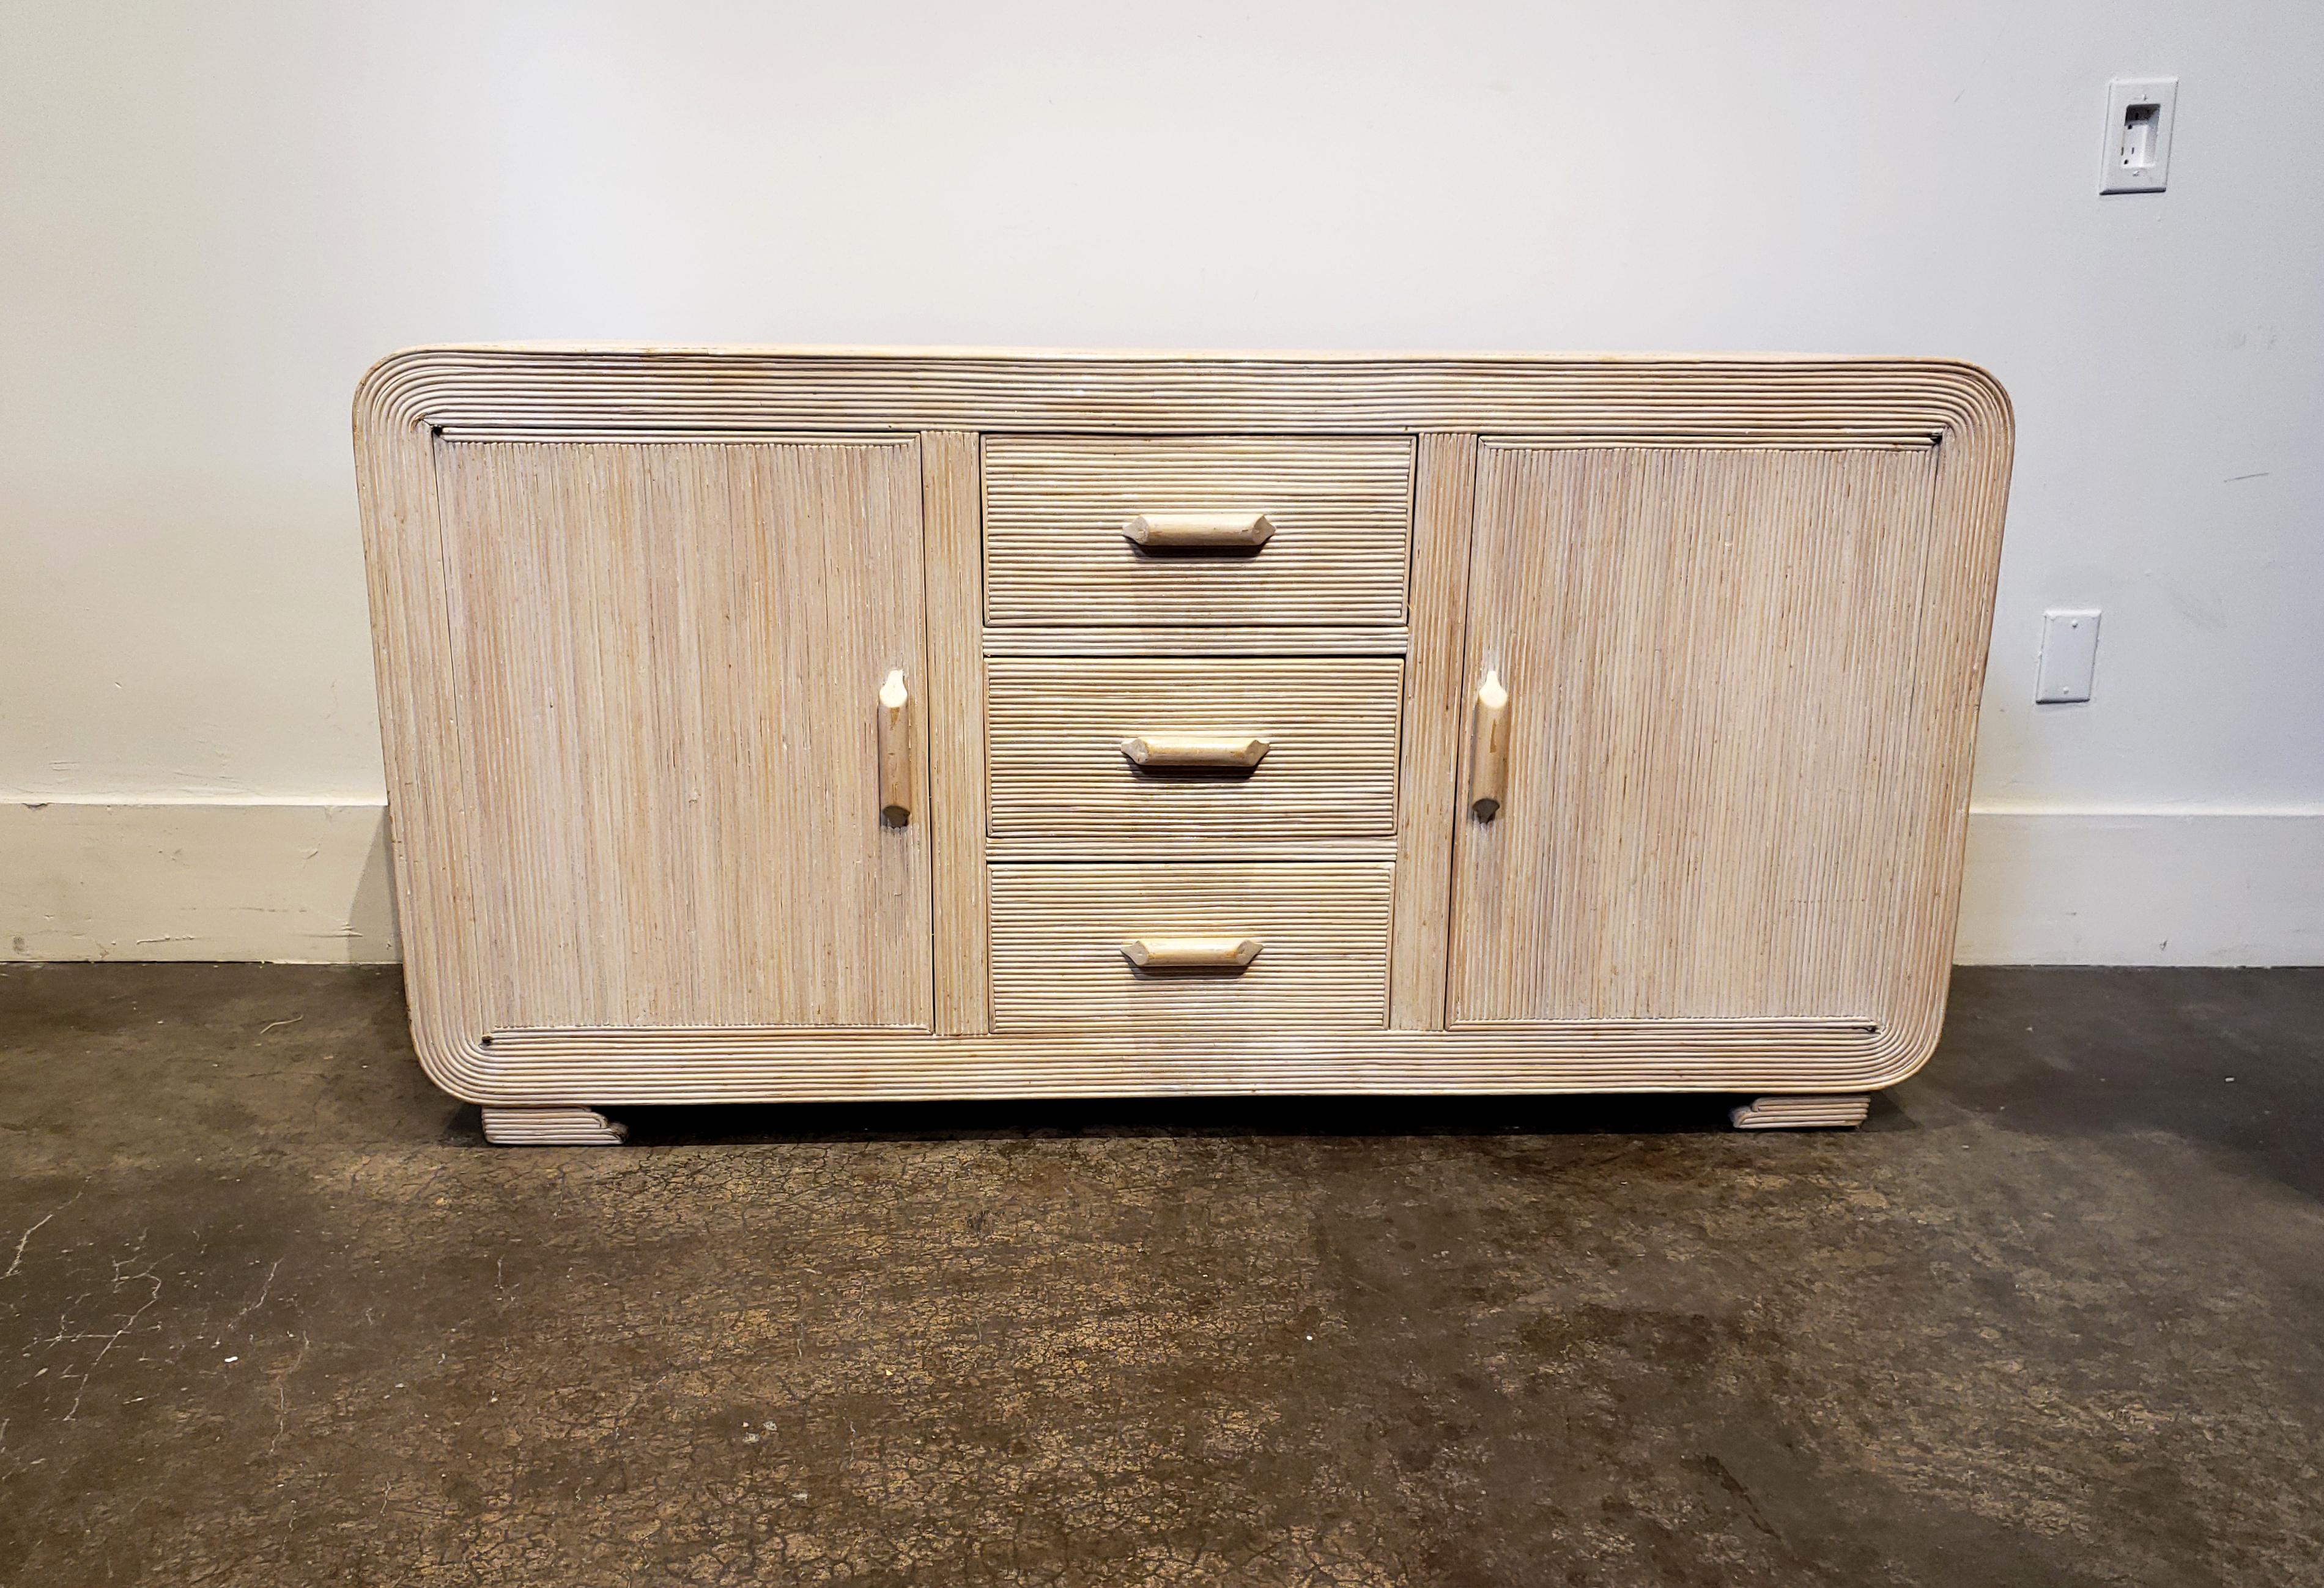 Lovely little whitewashed rattan credenza or sideboard with circular pattern to top that radiates out and down the sides. Has two side cabinet doors with whitewashed interiors and three stacked central drawers. A Classic 1980s piece that fits in